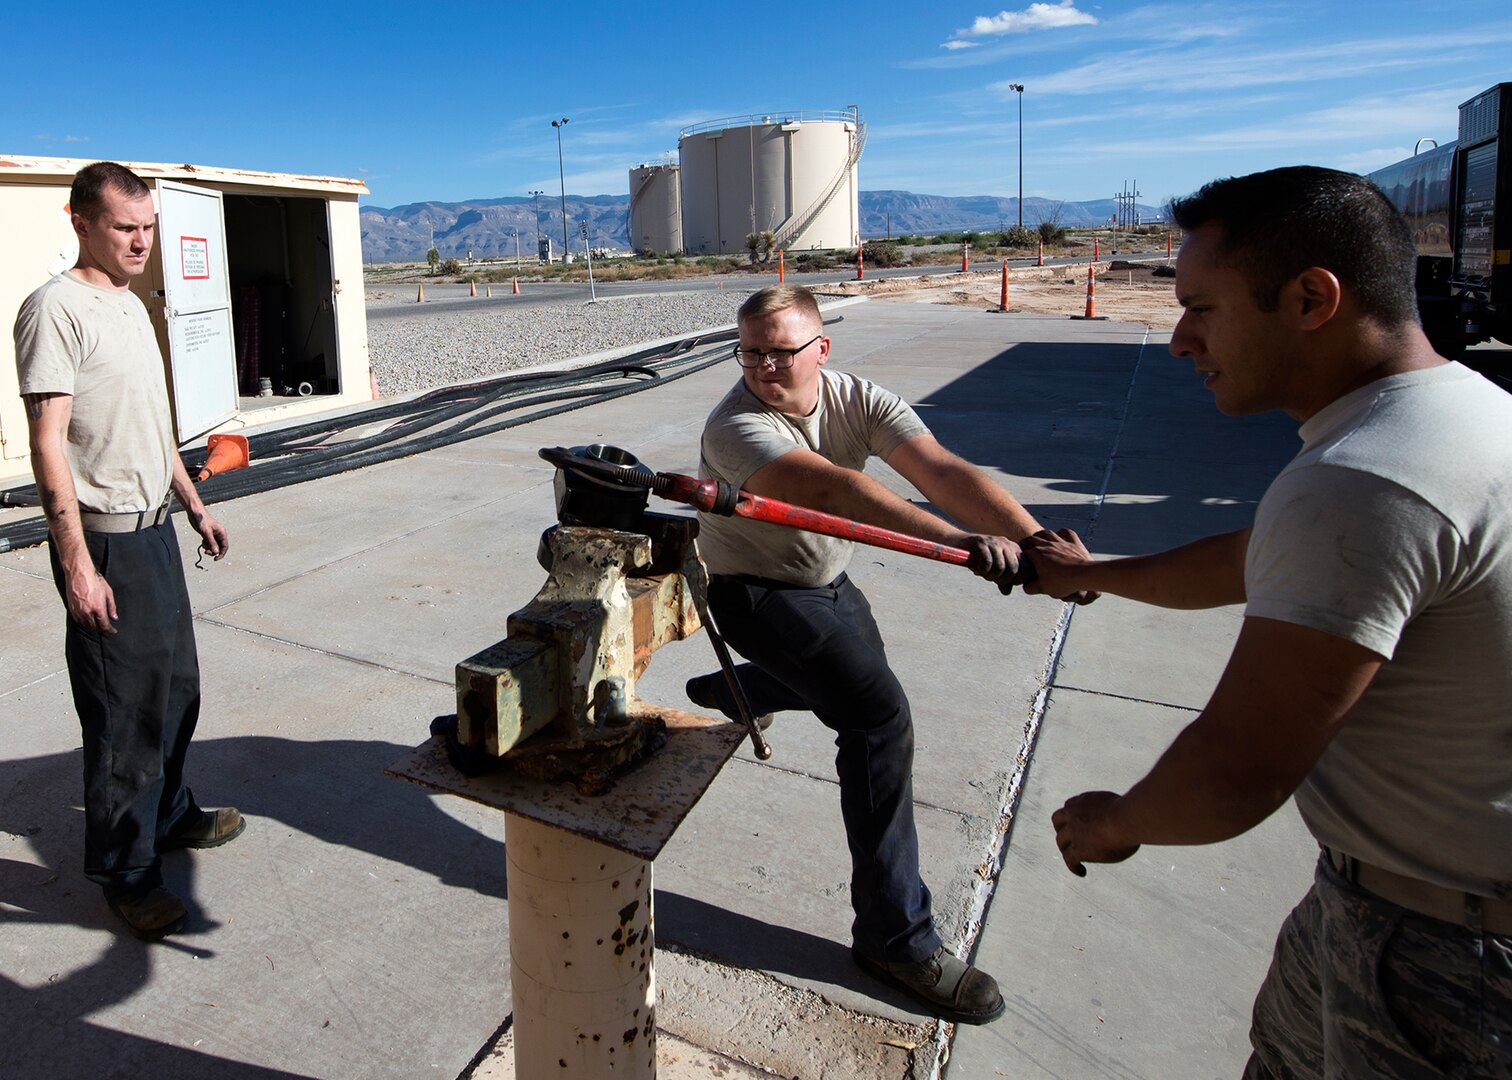 Airmen from the 49th Logistics Readiness Squadron refueling maintenance shop use a vise and wrench to separate two vehicle parts that have been leaking fuel at Holloman Air Force Base, N.M., Dec. 4, 2017. The shop consists of three Airmen that are responsible for maintenance and upkeep of the base’s refueling vehicles in support of Holloman’s mission. (U.S. Air Force photo by Staff Sgt. Timothy M. Young)